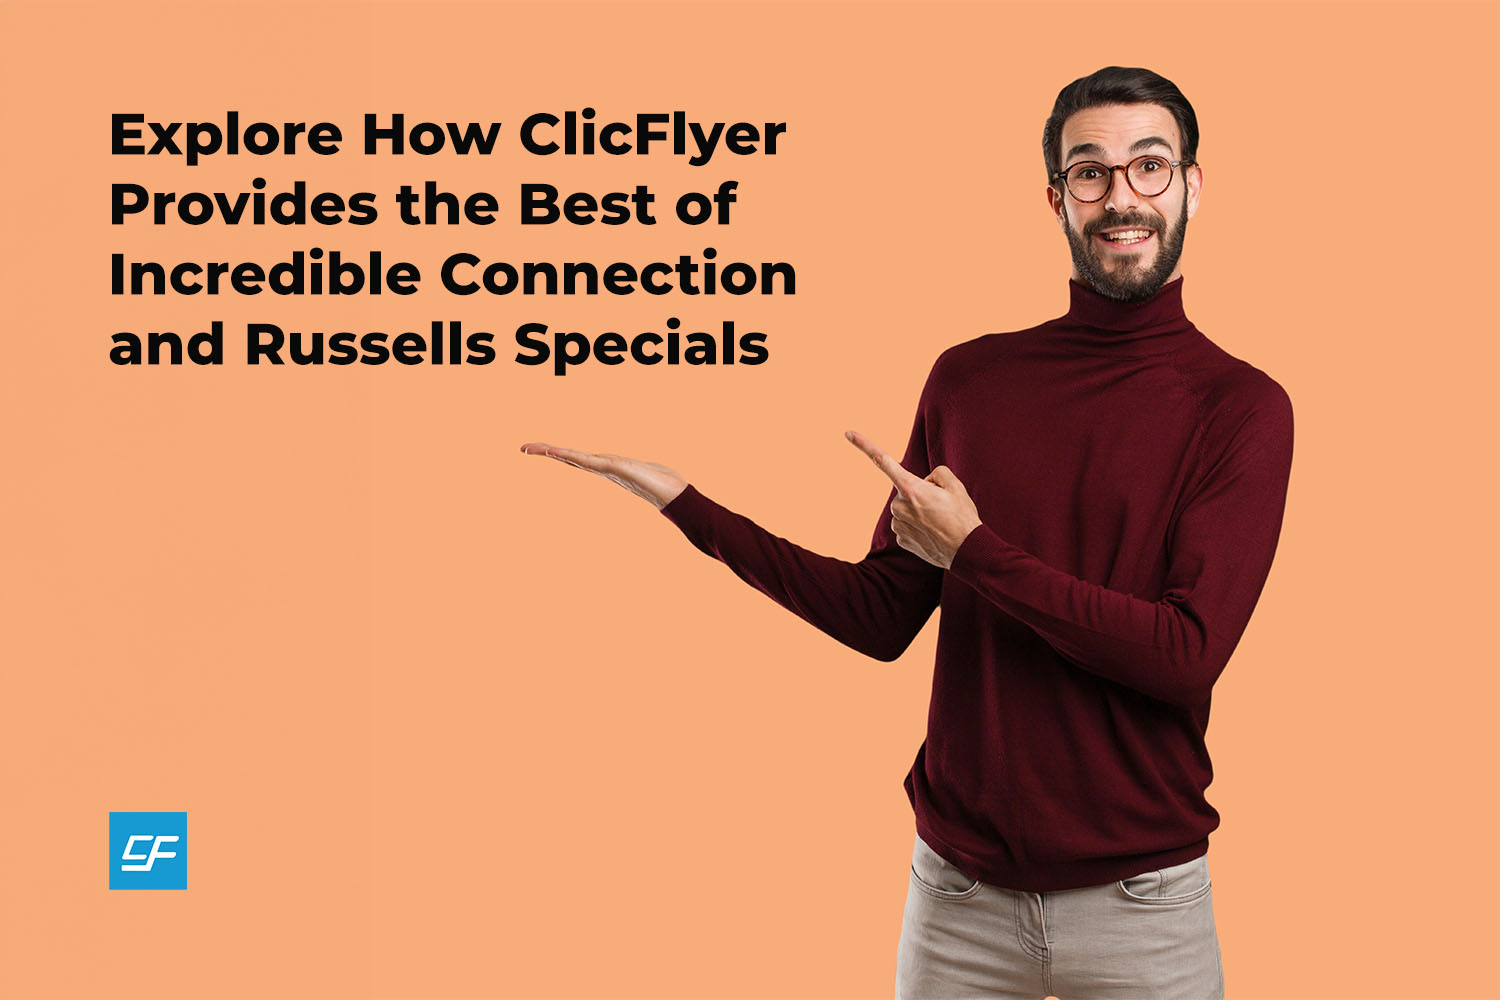 ClicFlyer Provides the Best of Incredible Connection and Russells Specials